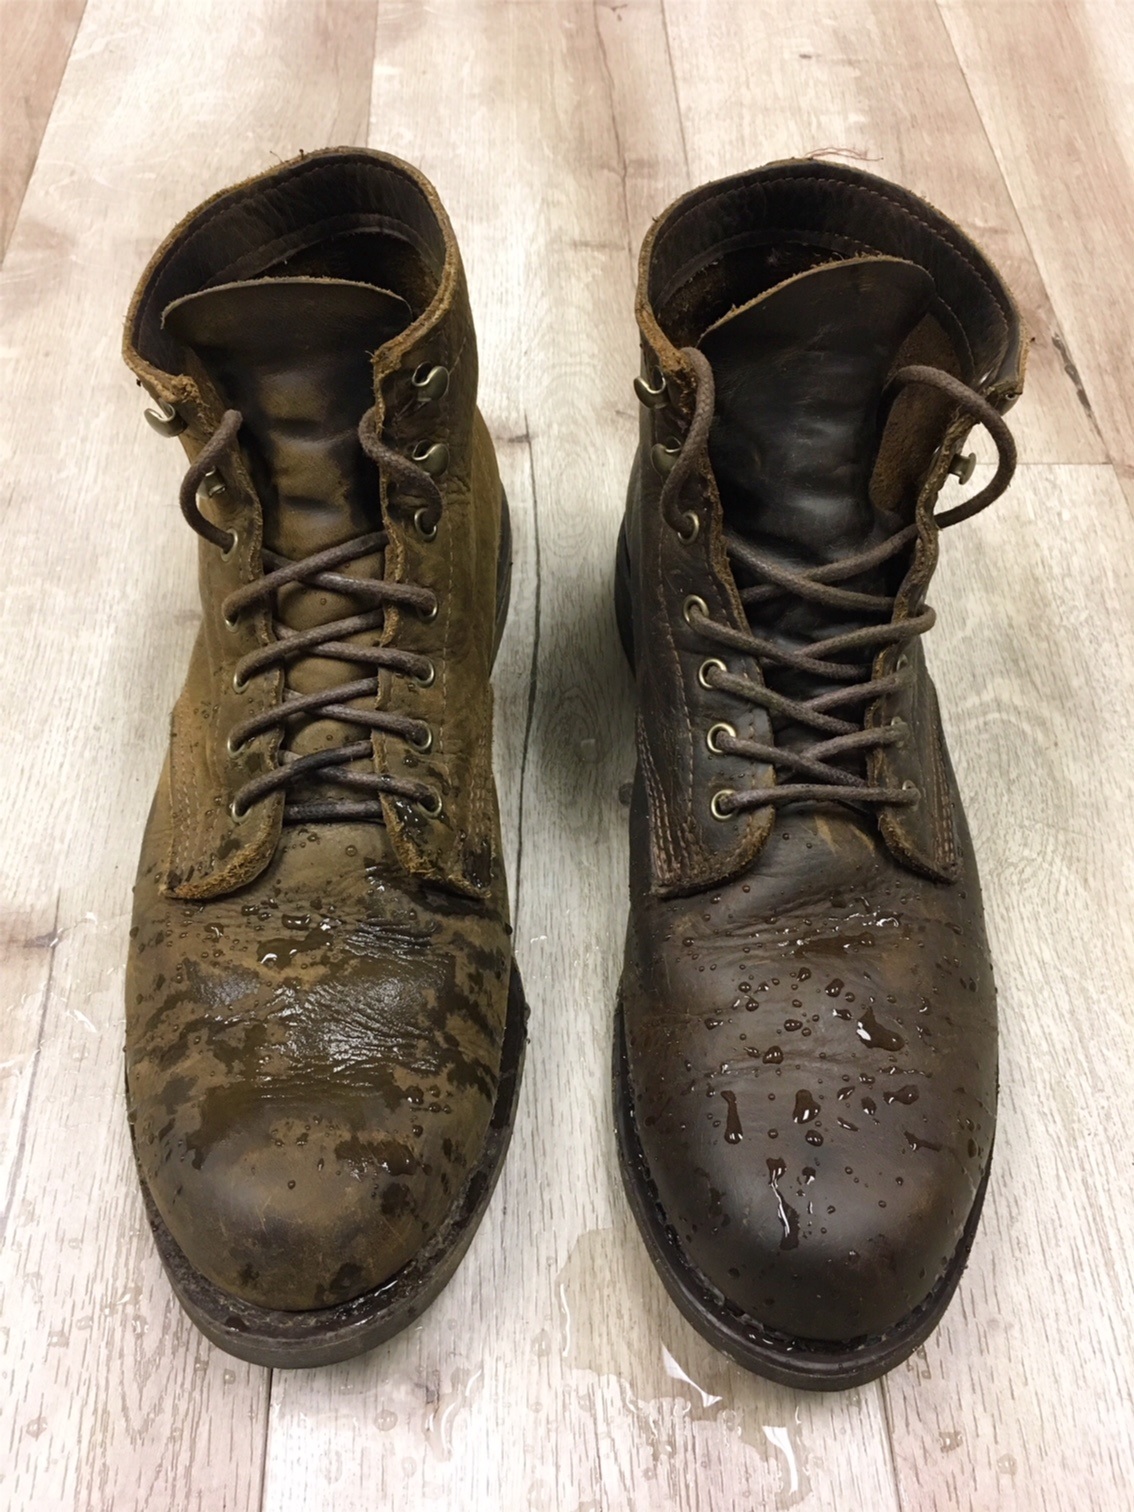 how to remove wax from boots